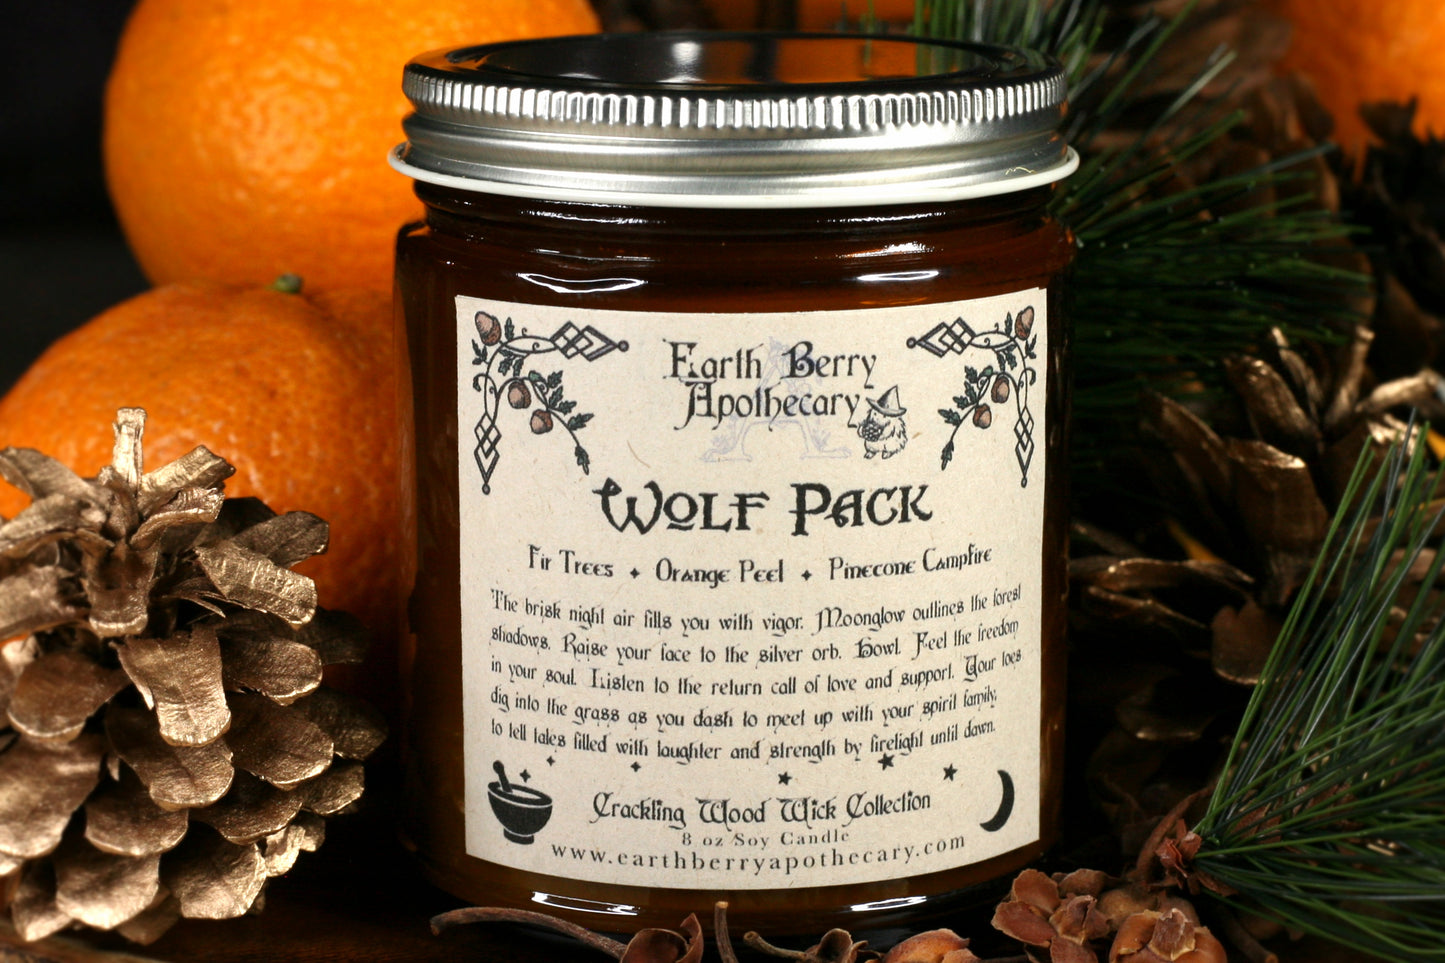 Wolf Pack Crackling Wood Wick Soy Candle